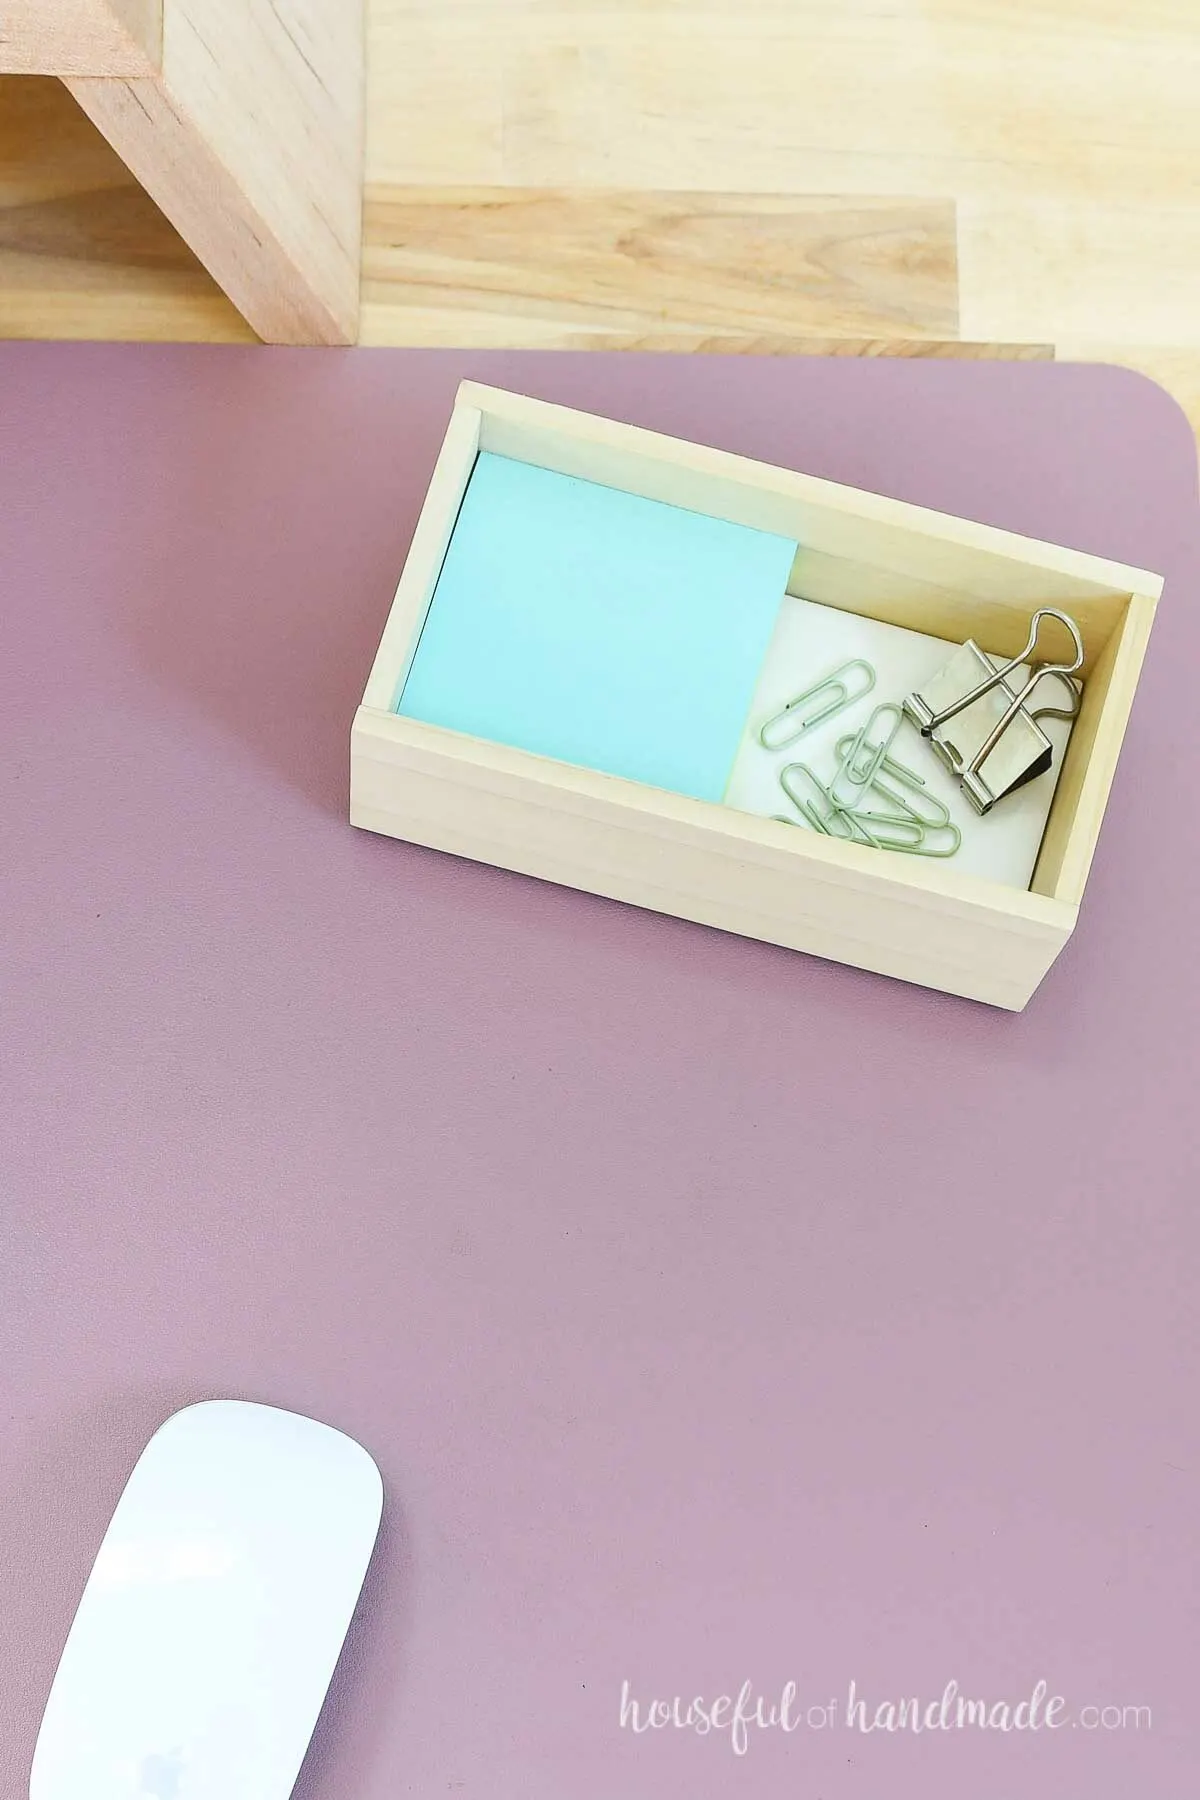 Desk organizing tray made from a white subway tile and 1/4" boards holding a pad of sticky-notes and paperclips. 